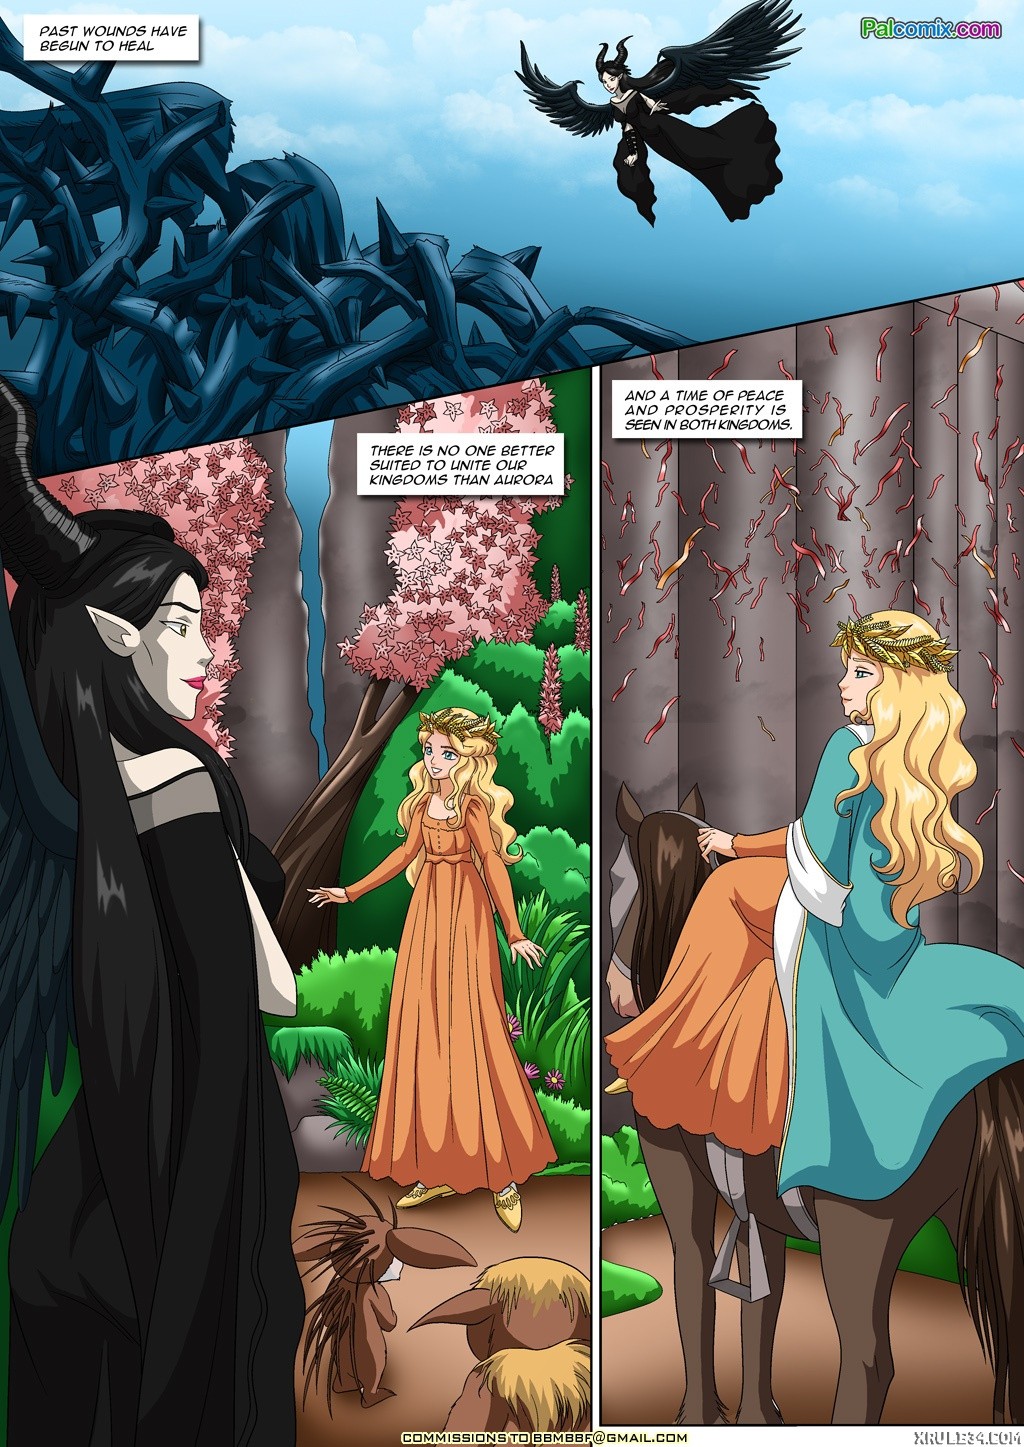 Coming of Age - Sleeping Beauty porn comic picture 2